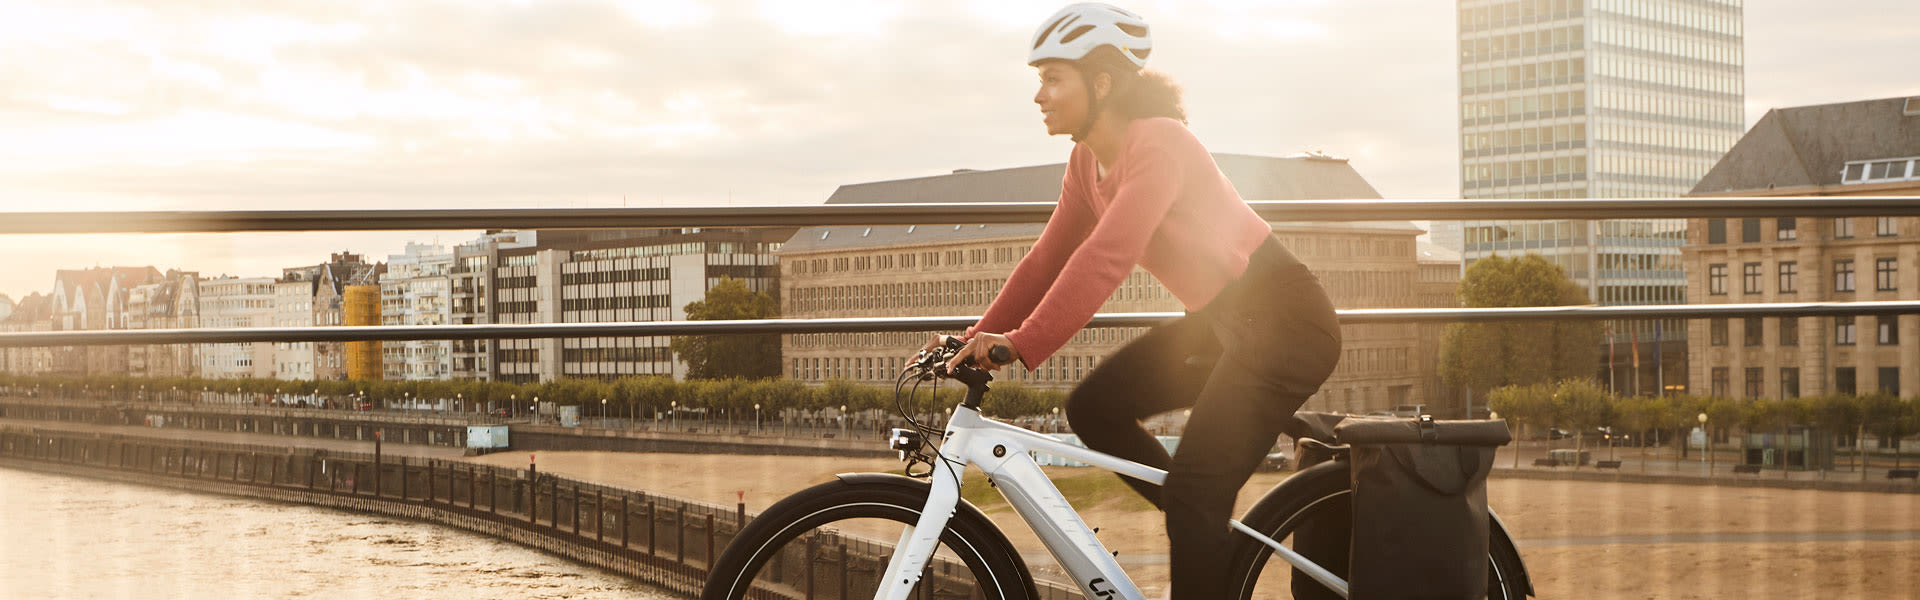 What to wear for commuting by bike  Stay comfortable on the ride to work   BikeRadar